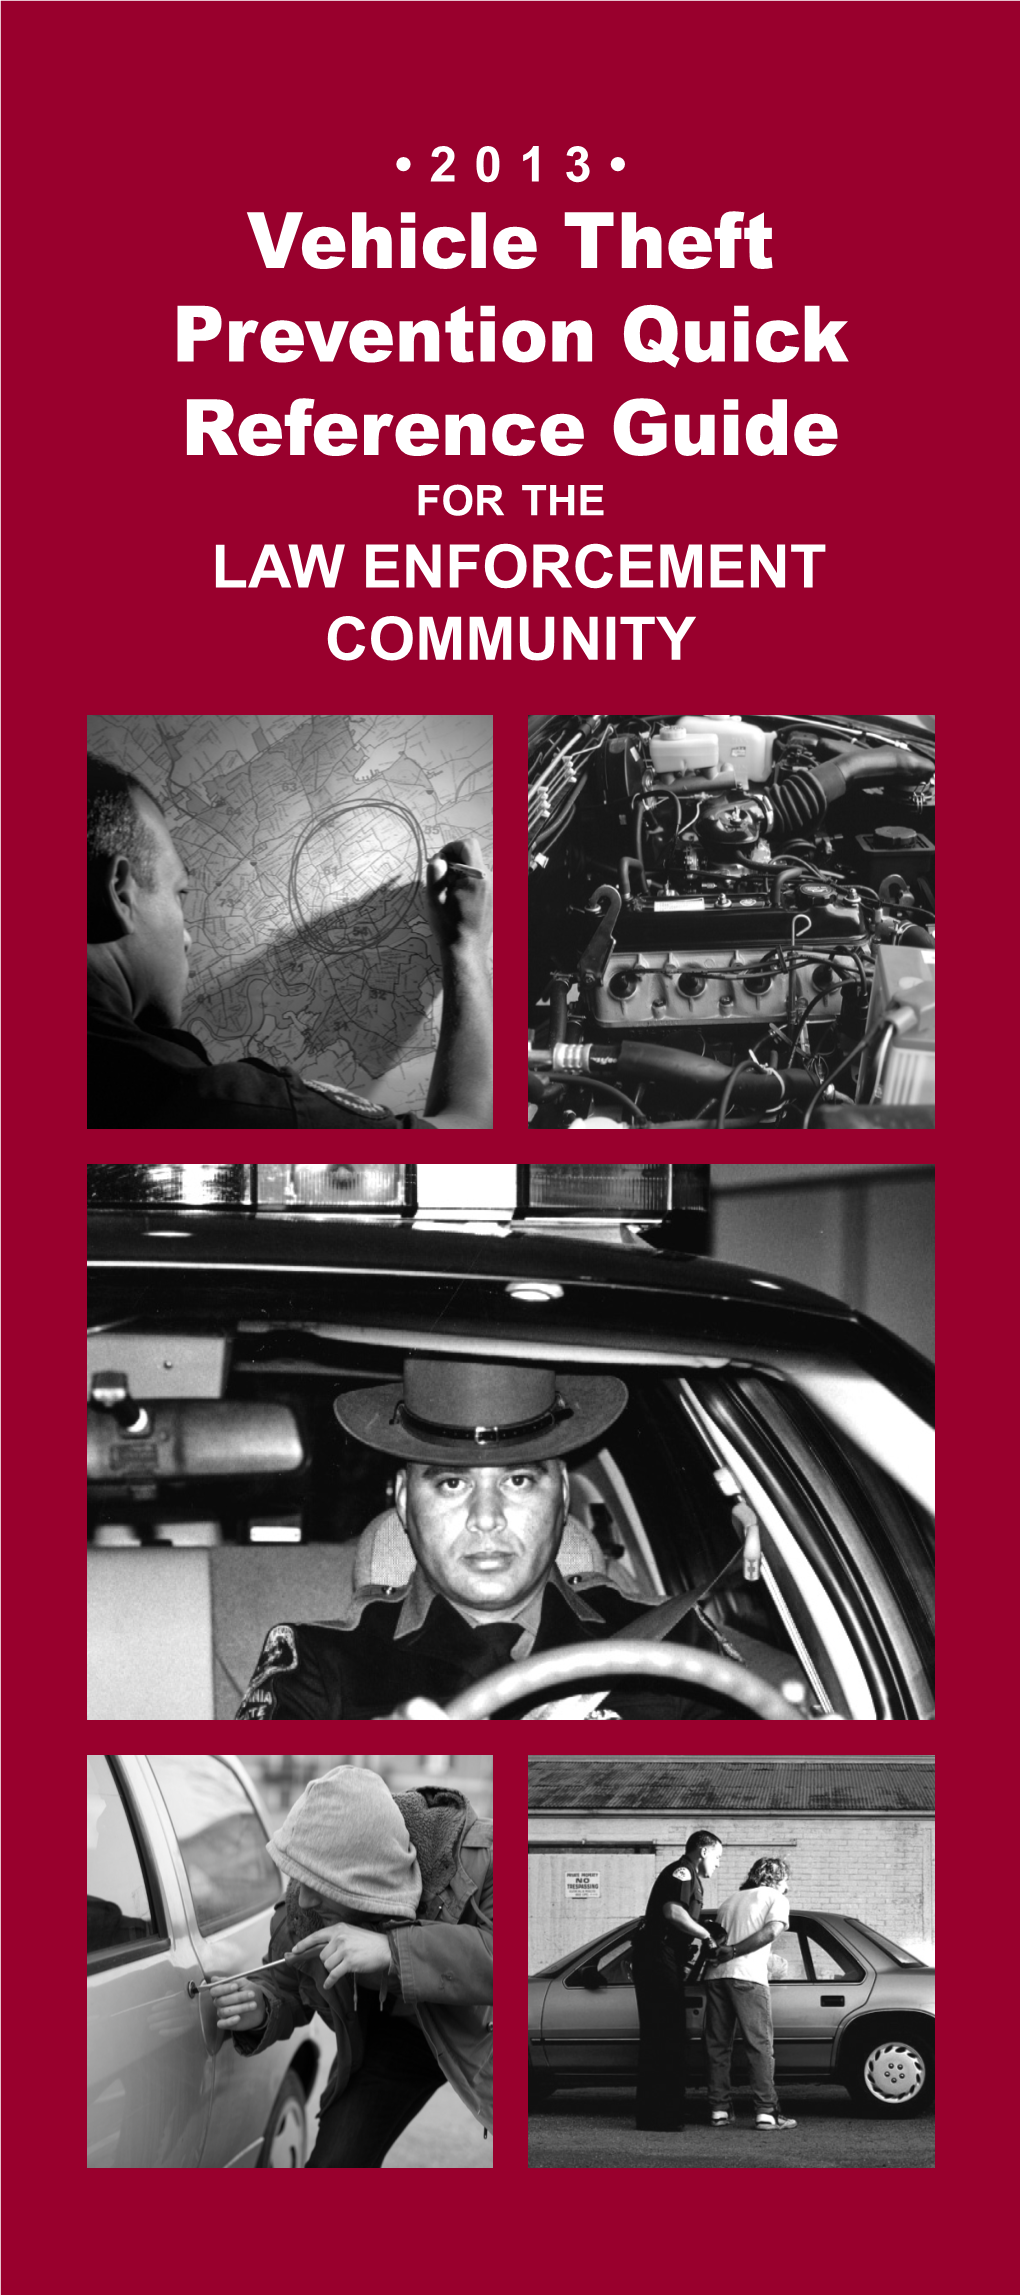 Vehicle Theft Prevention Quick Reference Guide for the LAW ENFORCEMENT COMMUNITY FOREWORD